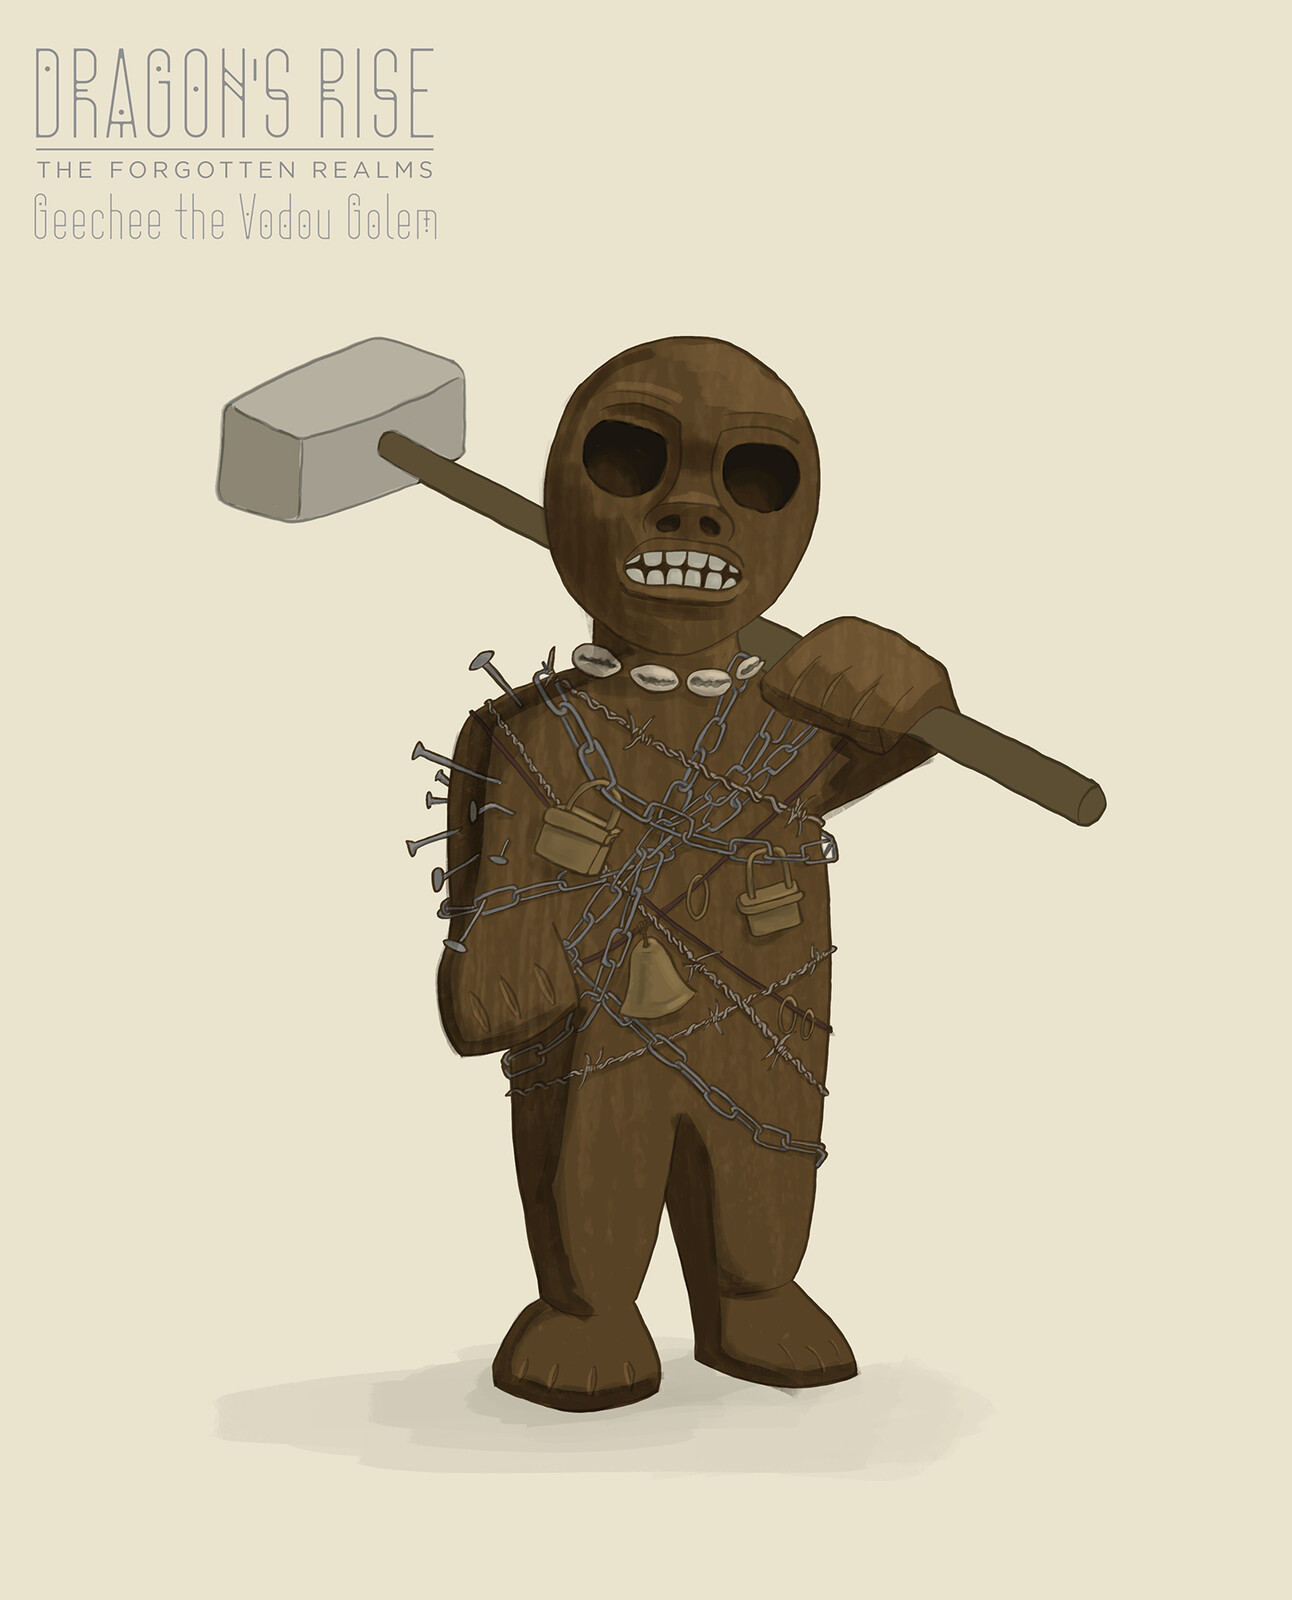 GEECHEE, THE VODOU GOLEM - A charmed vodou fetish icon tasked with aiding The Weevil on his quest.